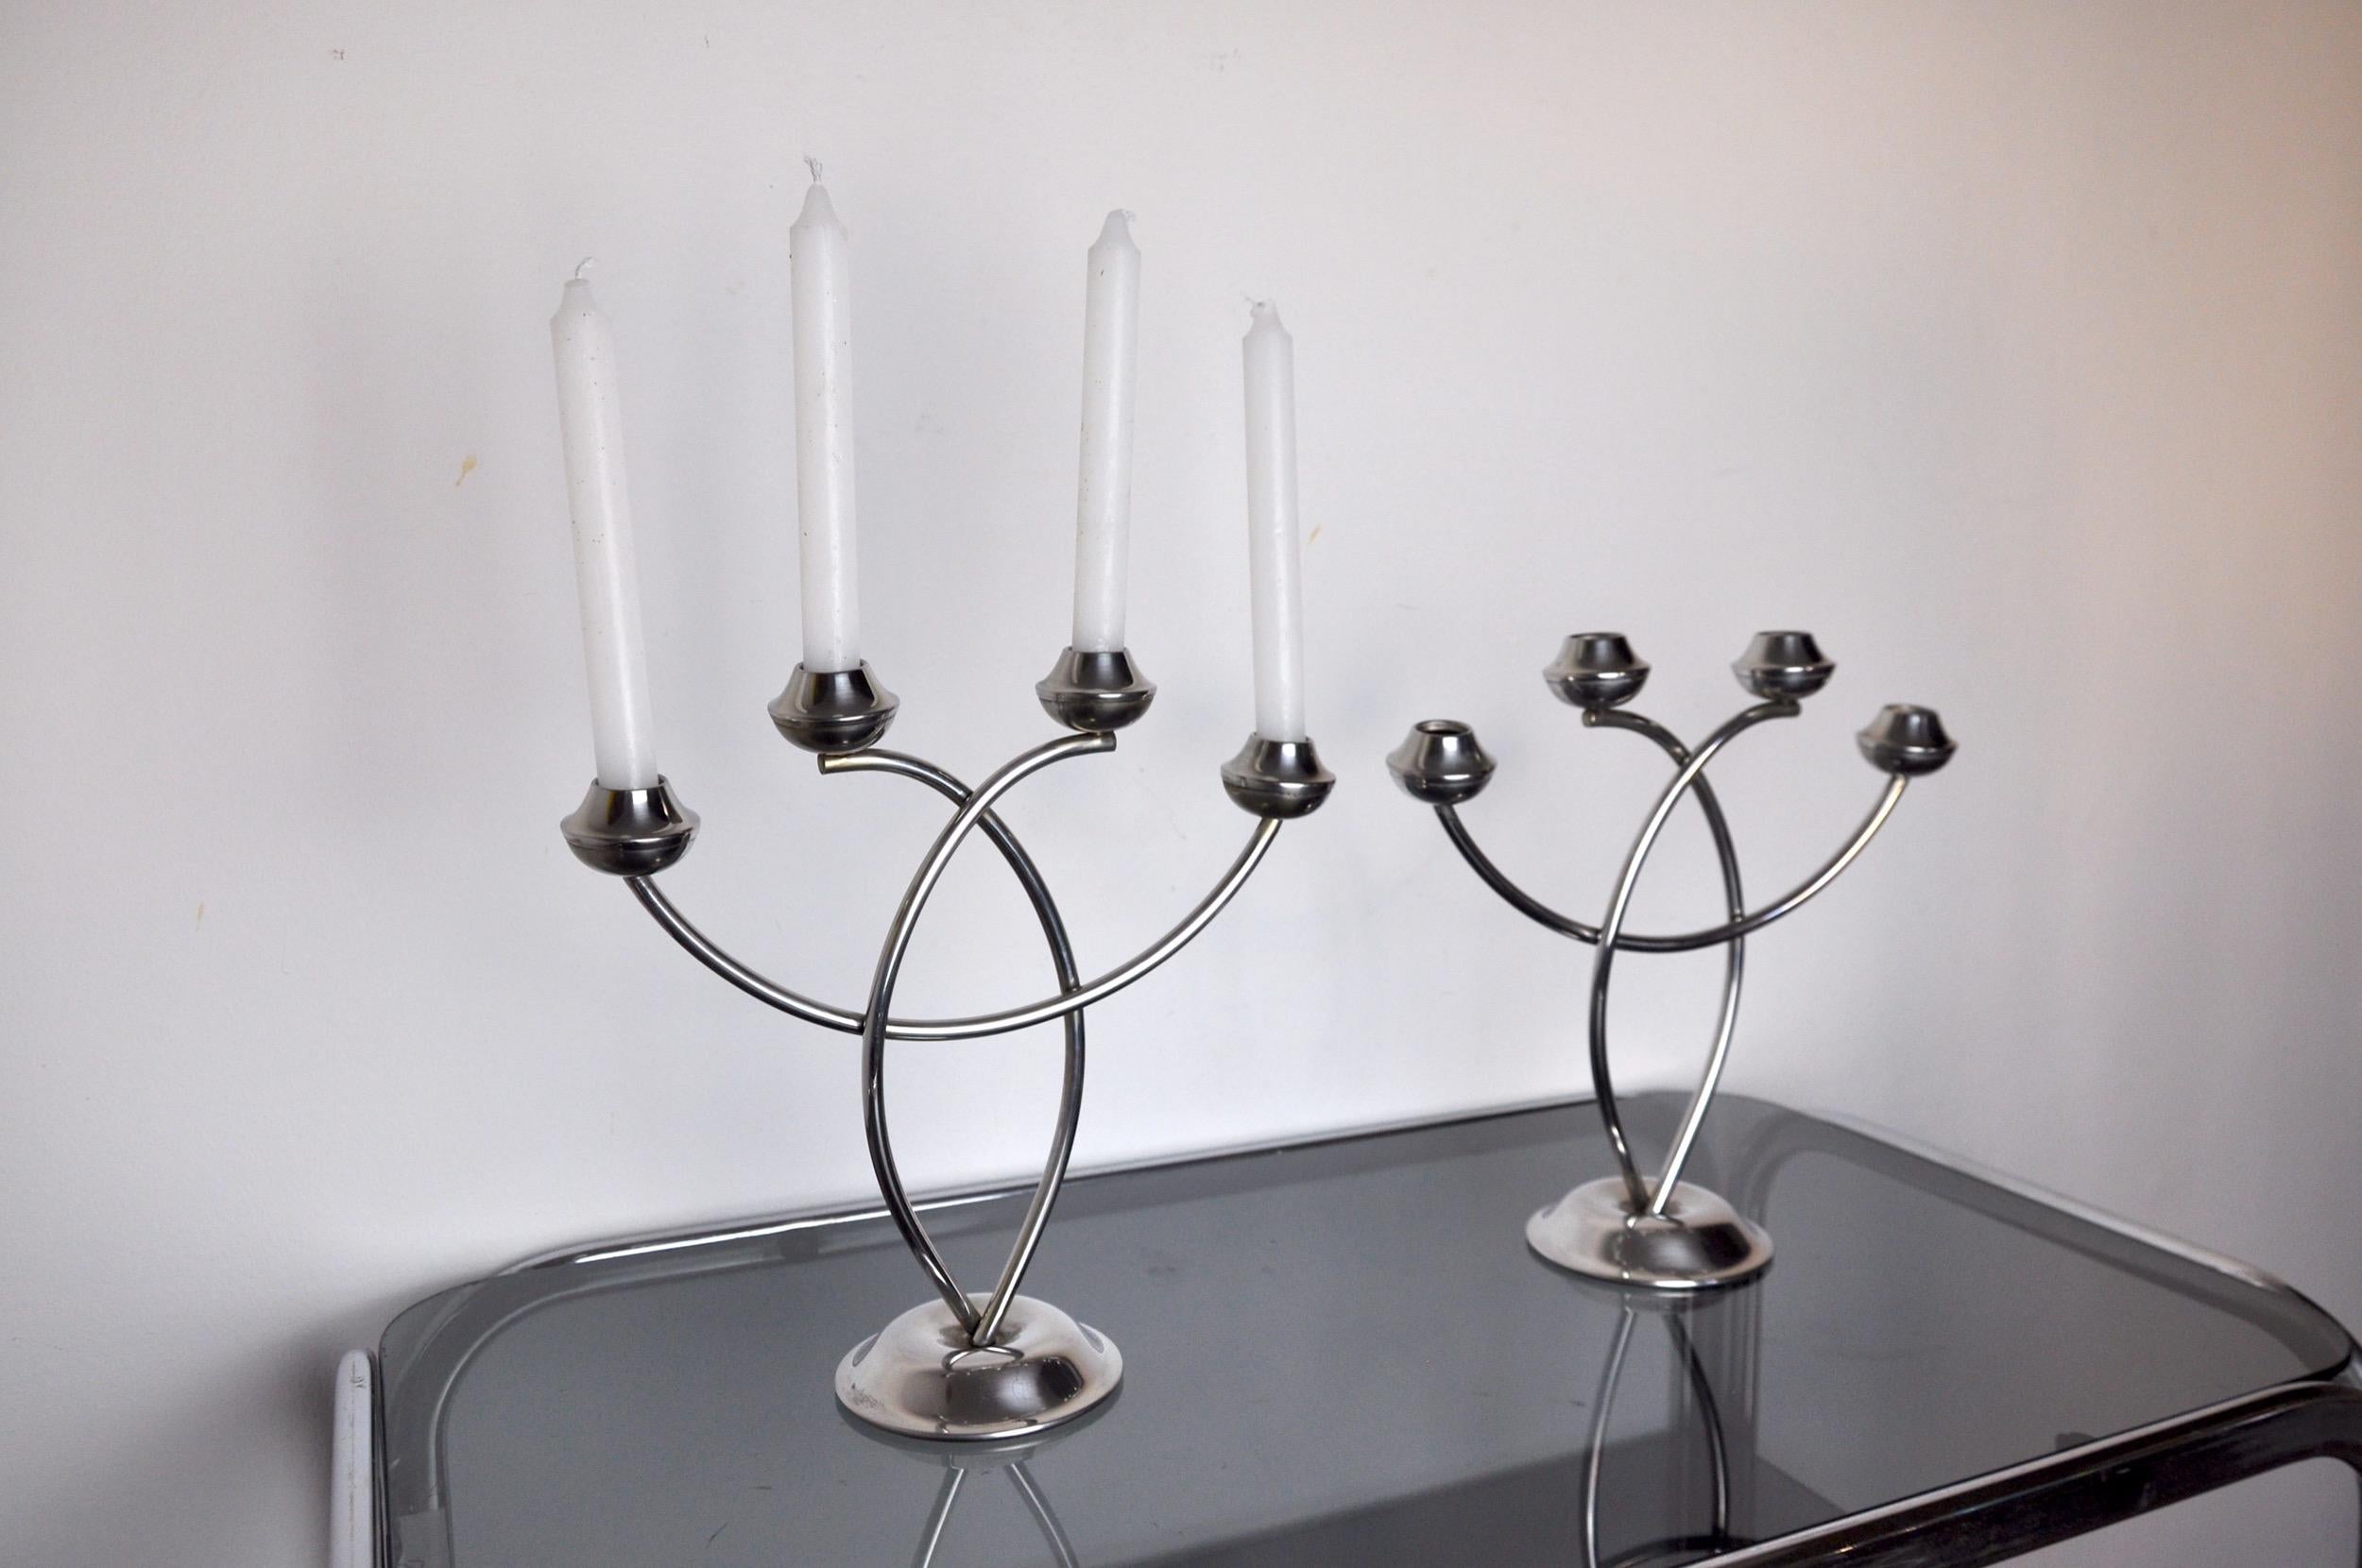 Spanish Pair of Art Deco Candle Holder in Stainless Steel 4 Flammes, Spain, 1970 For Sale